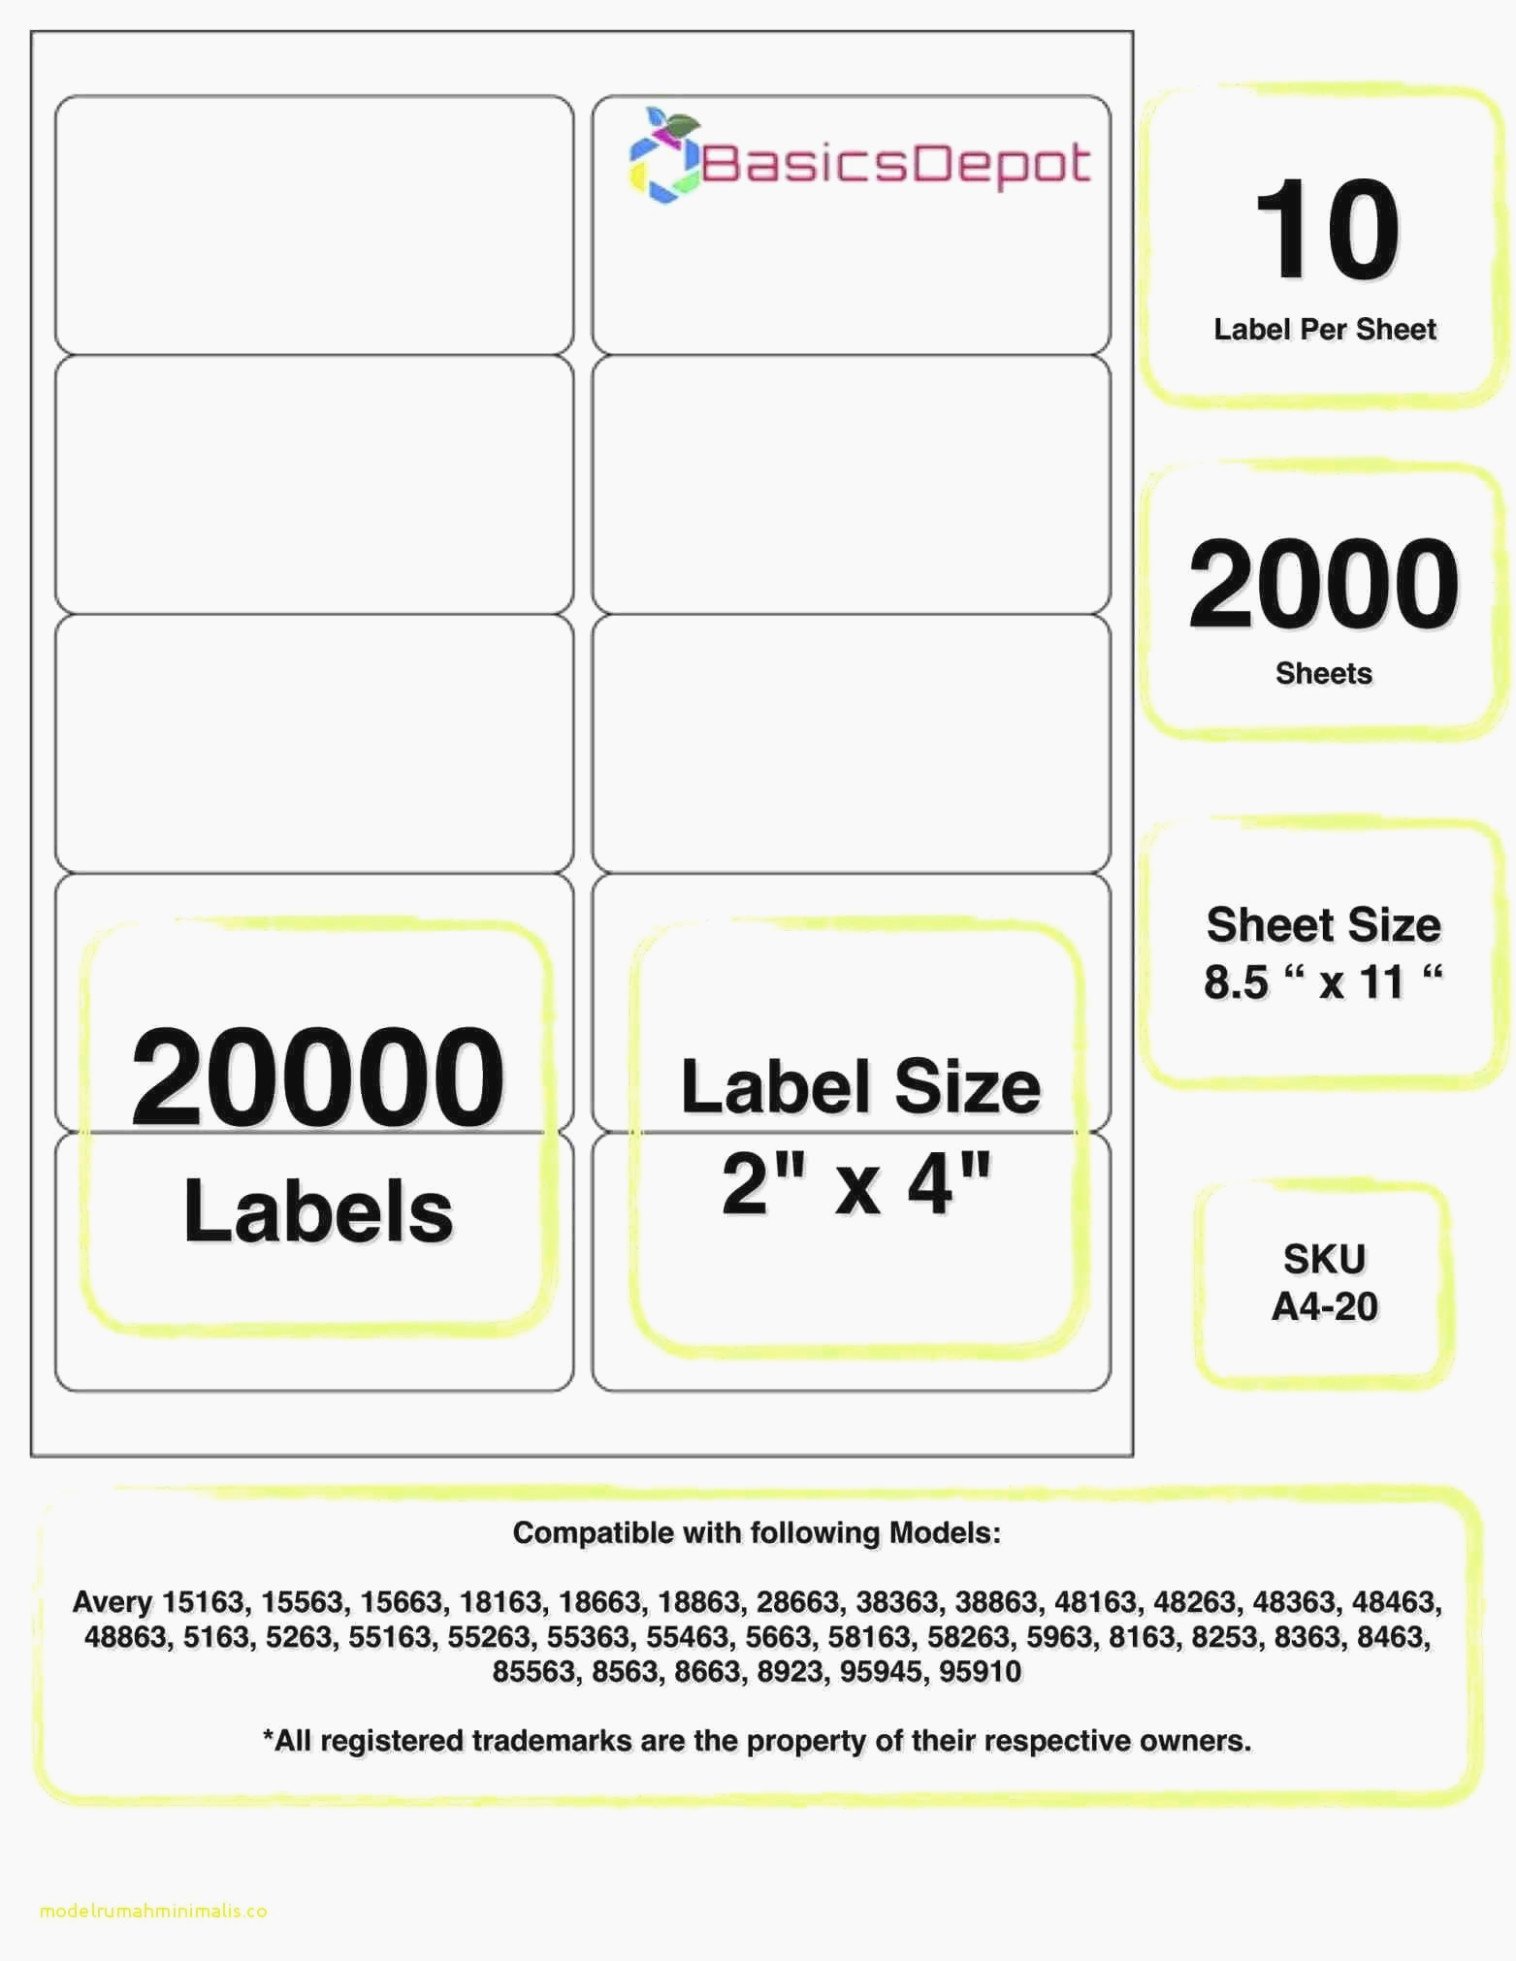 35-avery-label-templates-5163-labels-2021